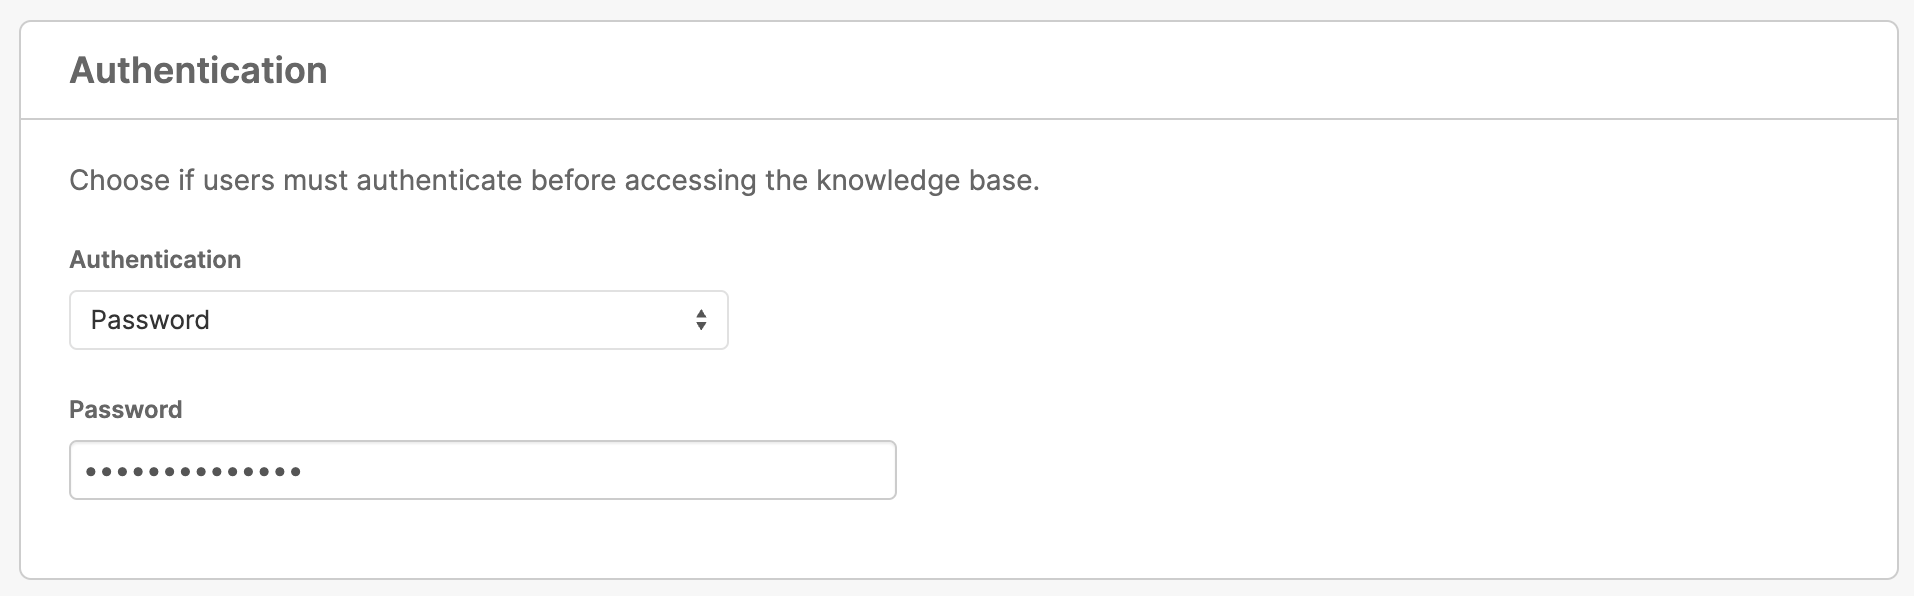 authentication settings in knowledge base settings